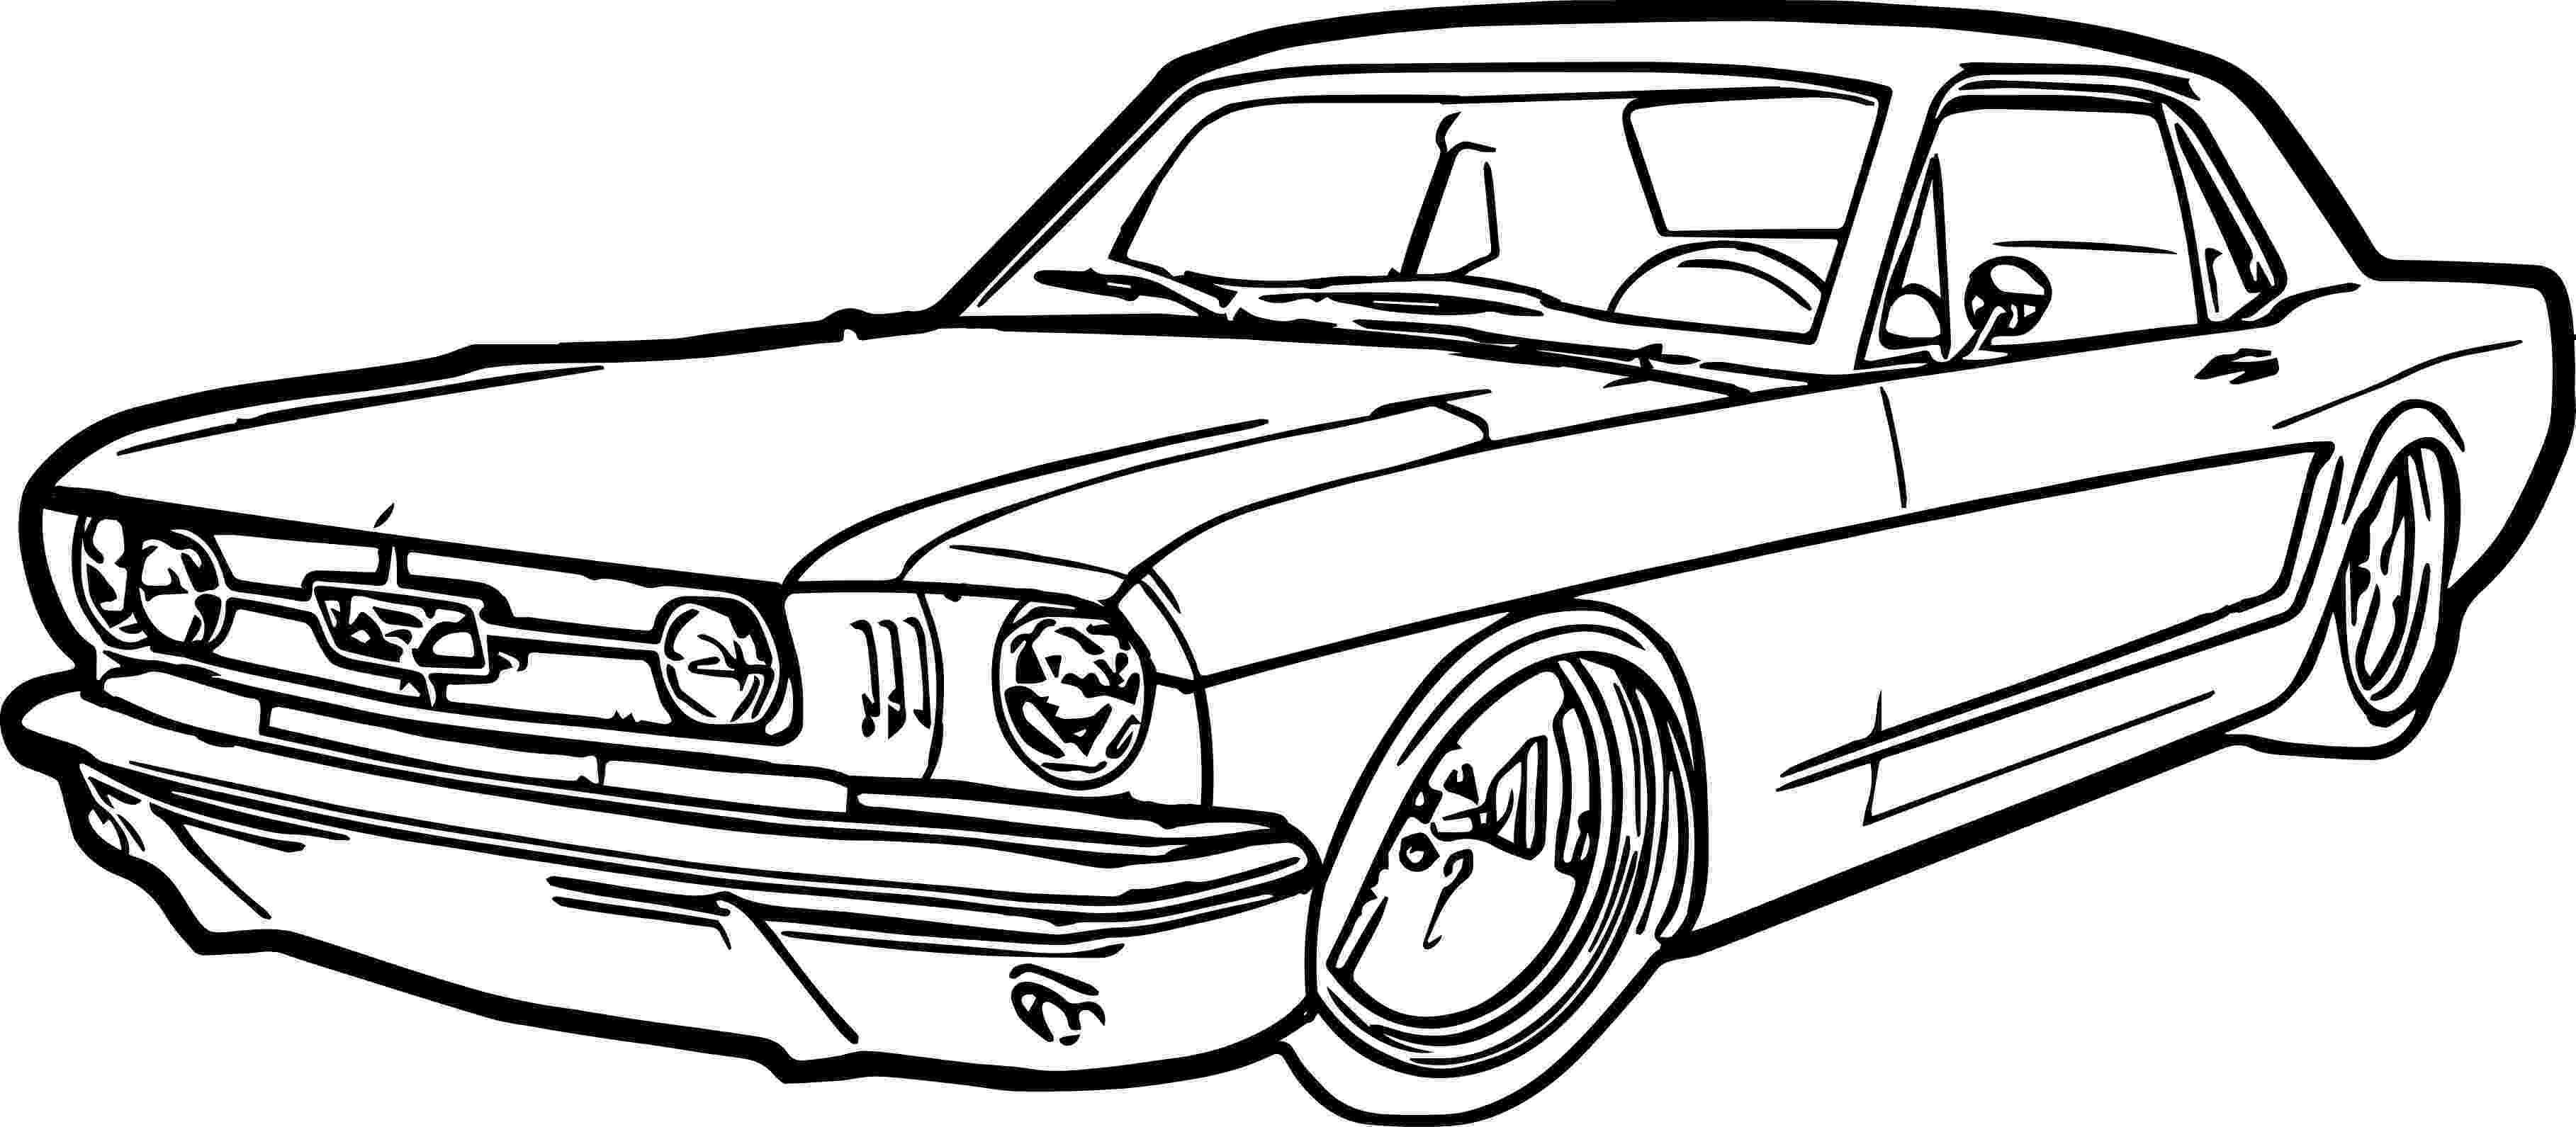 colouring pictures cars free printable cars coloring pages for kids cool2bkids pictures cars colouring 1 1